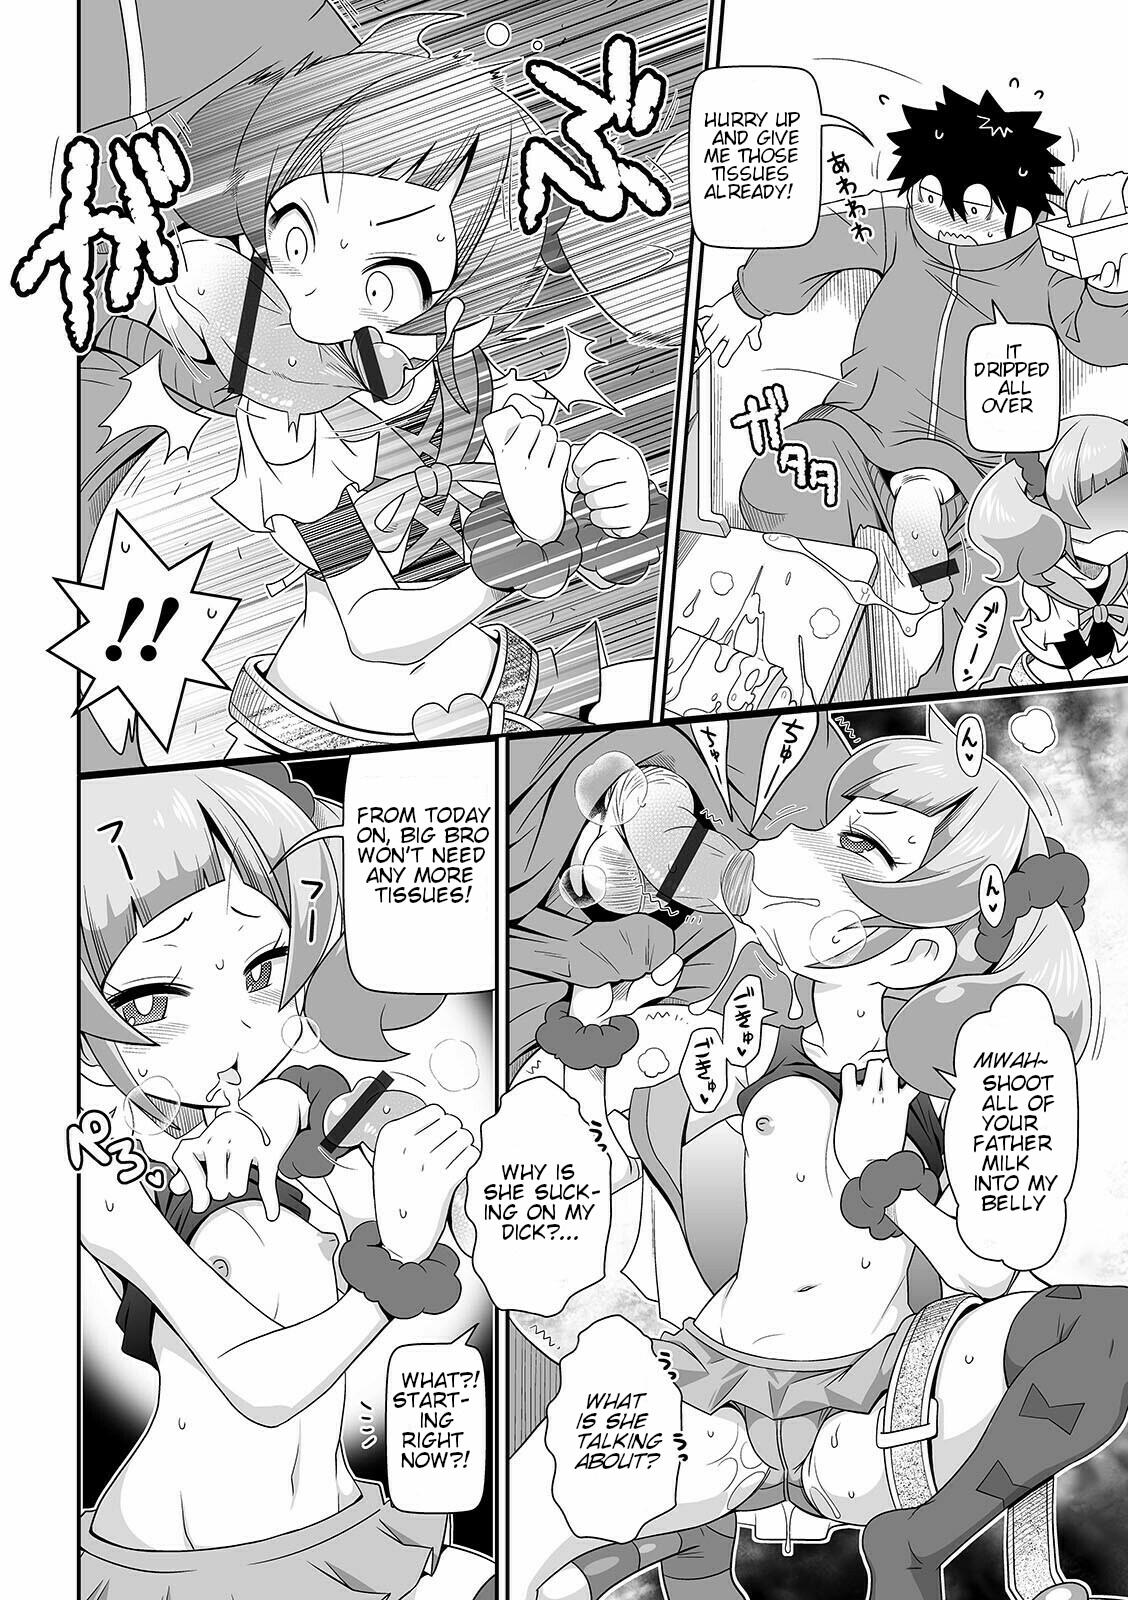 Foreskin Imouto Tissue | Lil Sis' Tissues - Original Swingers - Page 6